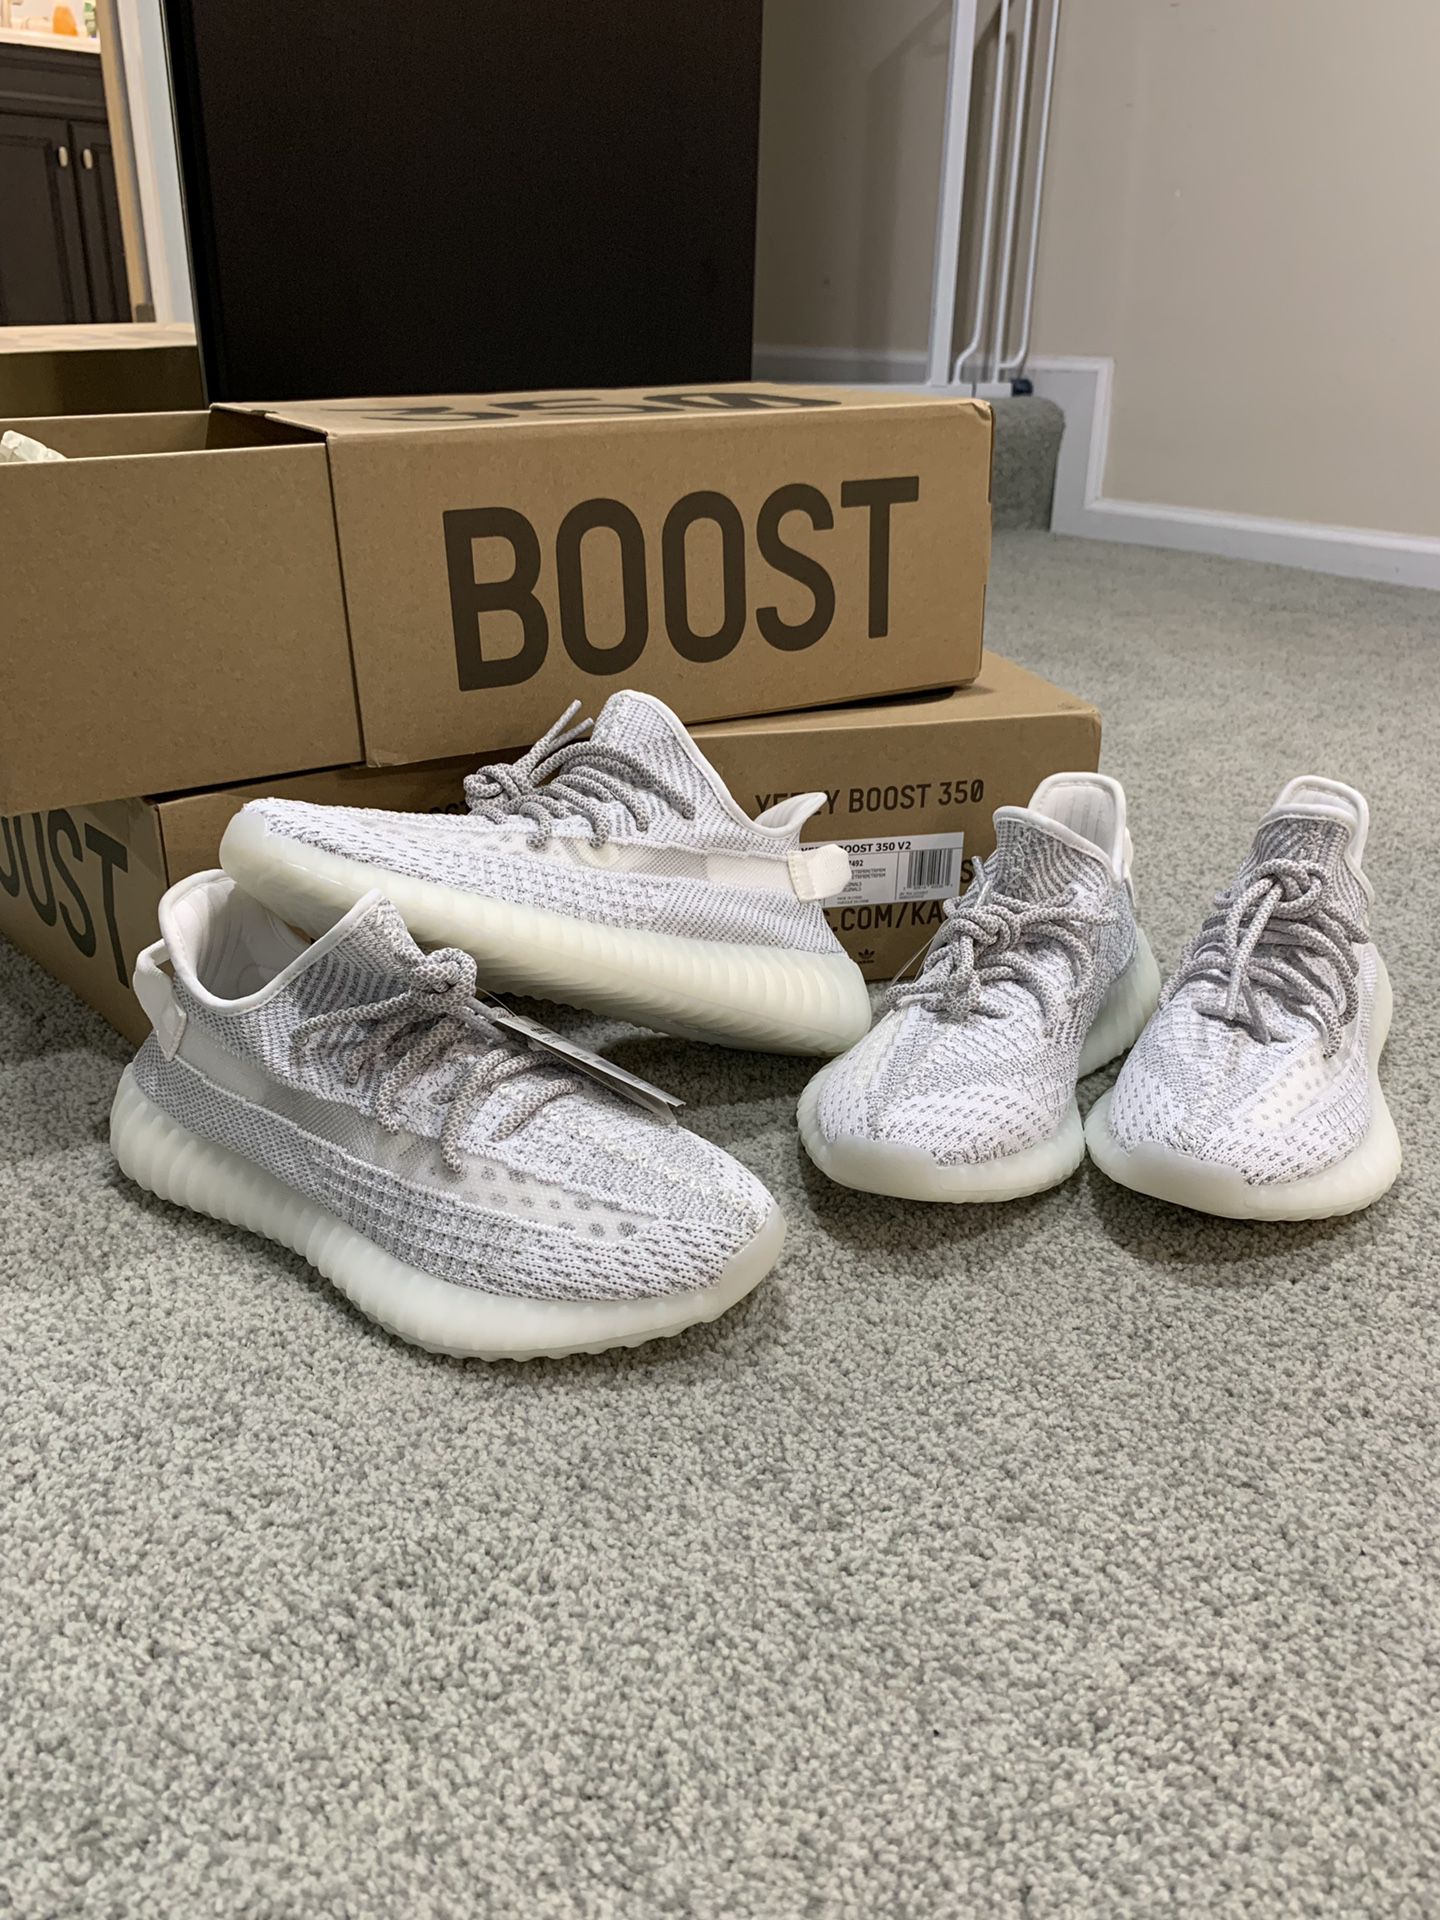 Adidas yeezy boost 350 v2 static Reflective (sold out)